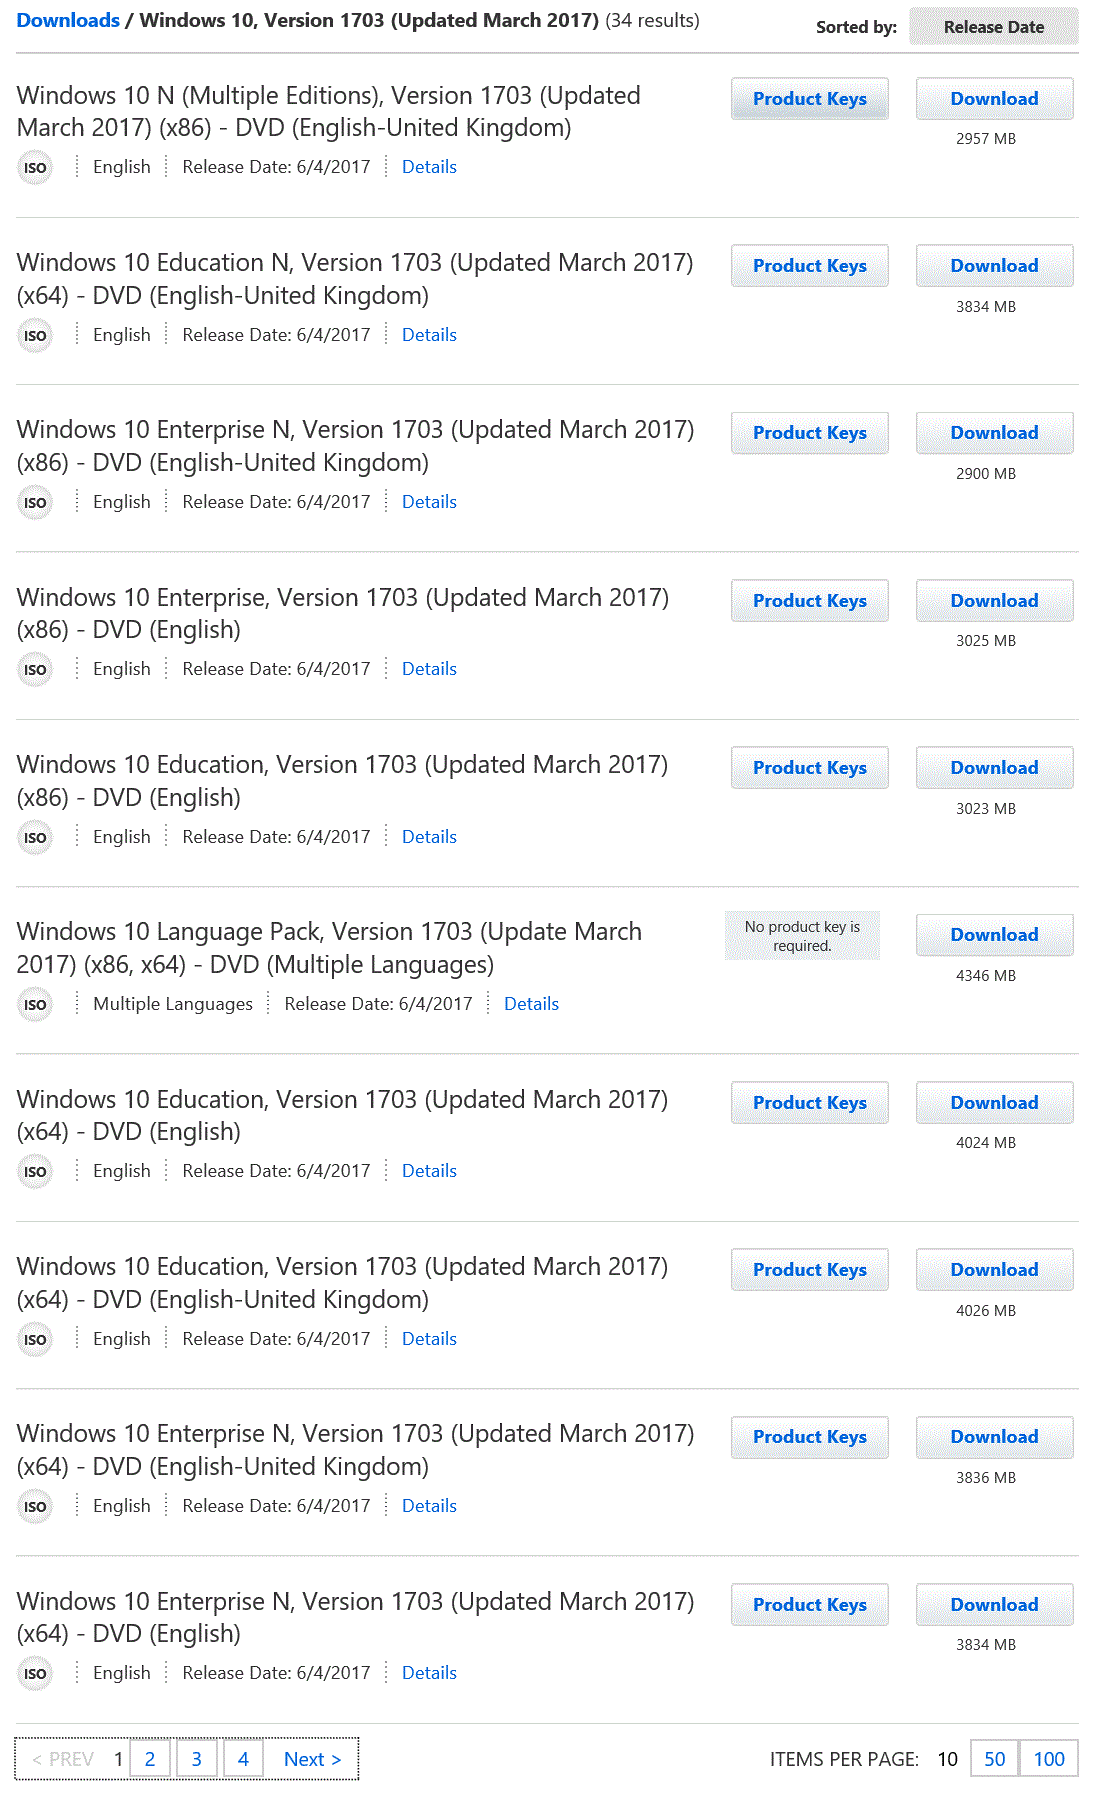 Download From Msdn